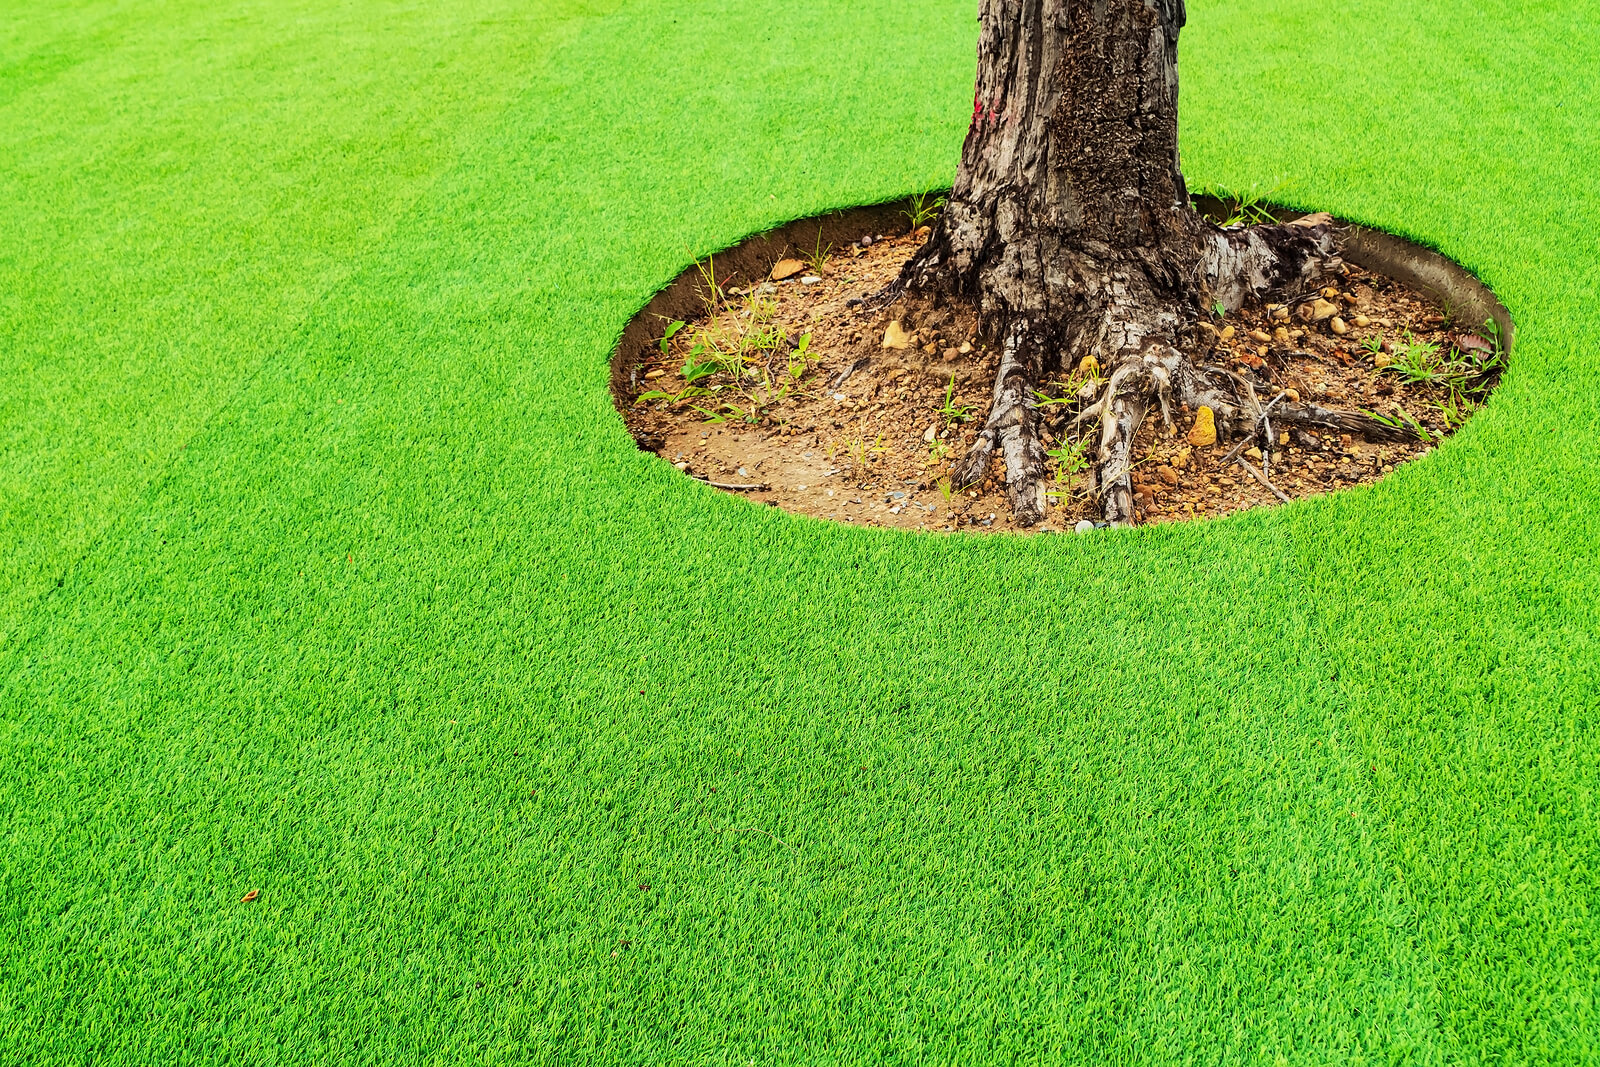 USA Safety Surfacing Experts-Synthetic Turf